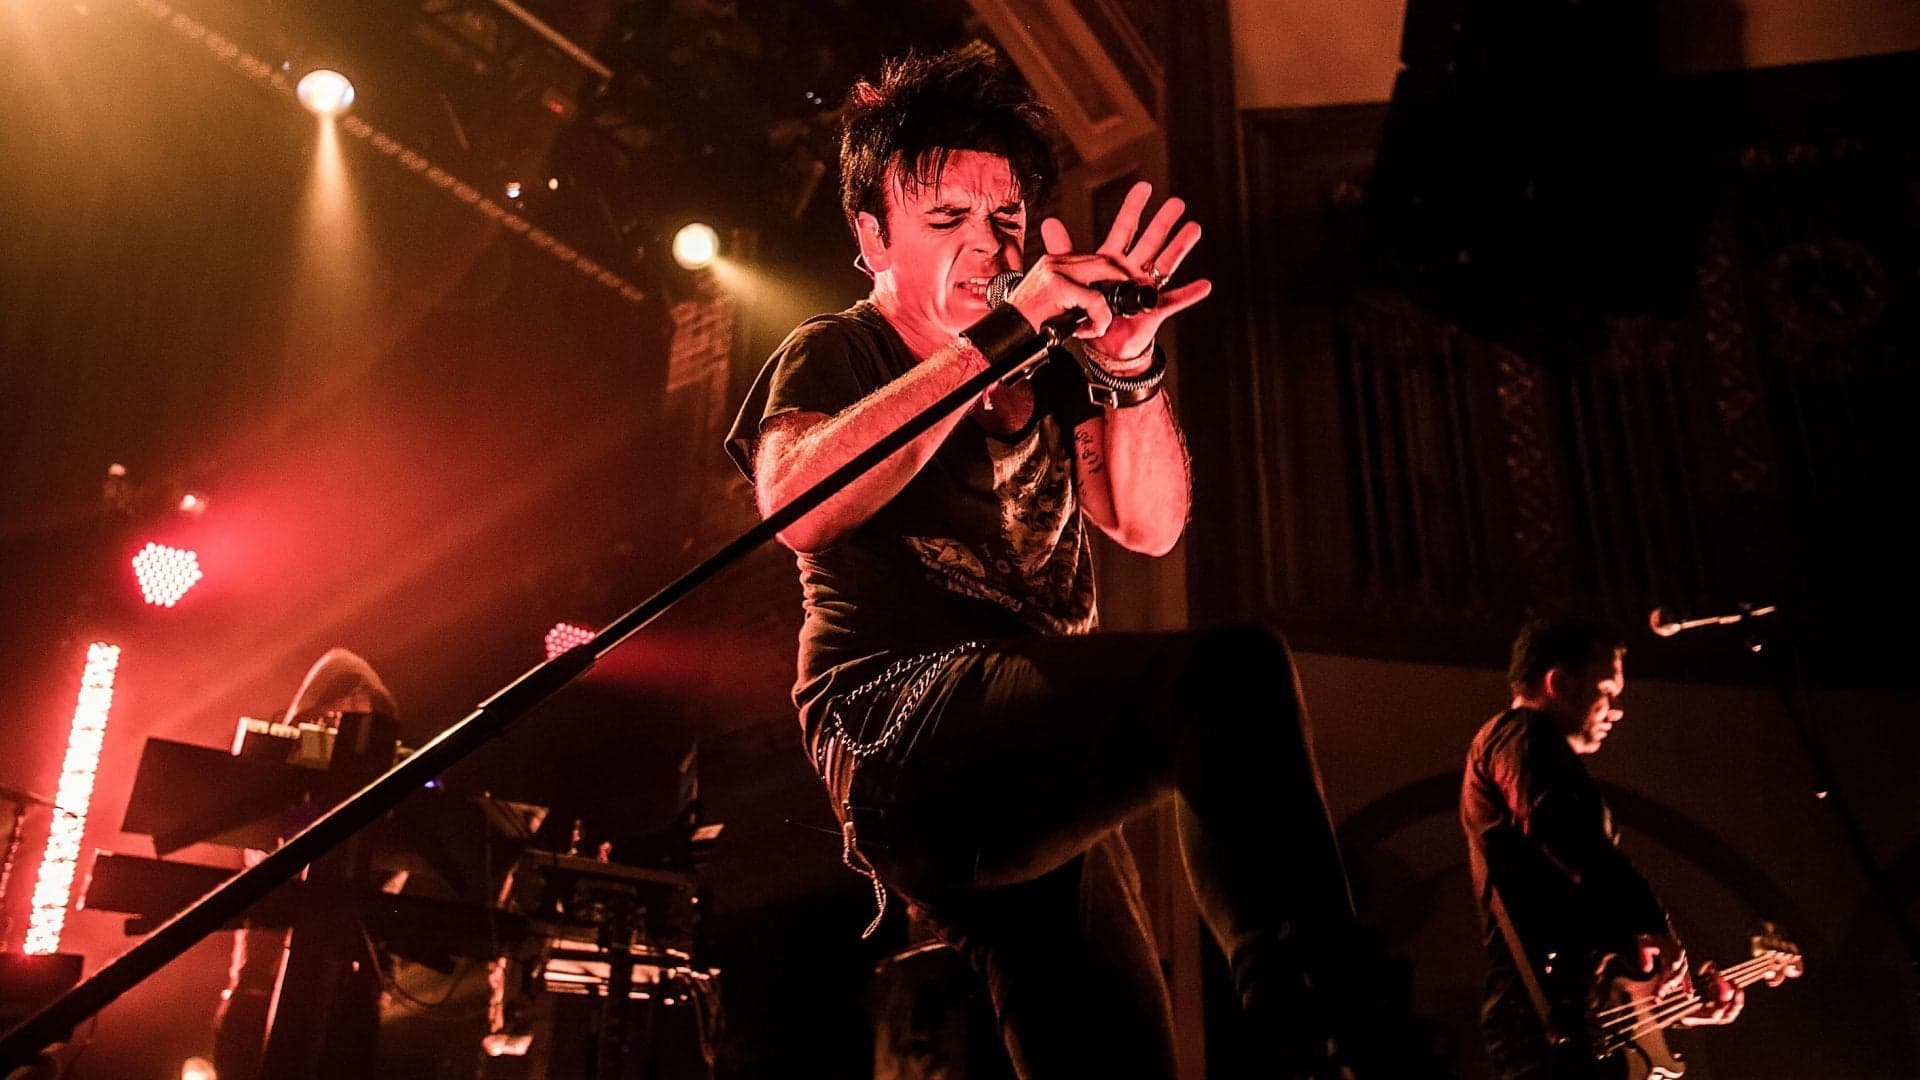 Tour Bus of Musician Gary Numan Hits and Kills 91-Year-Old Pedestrian